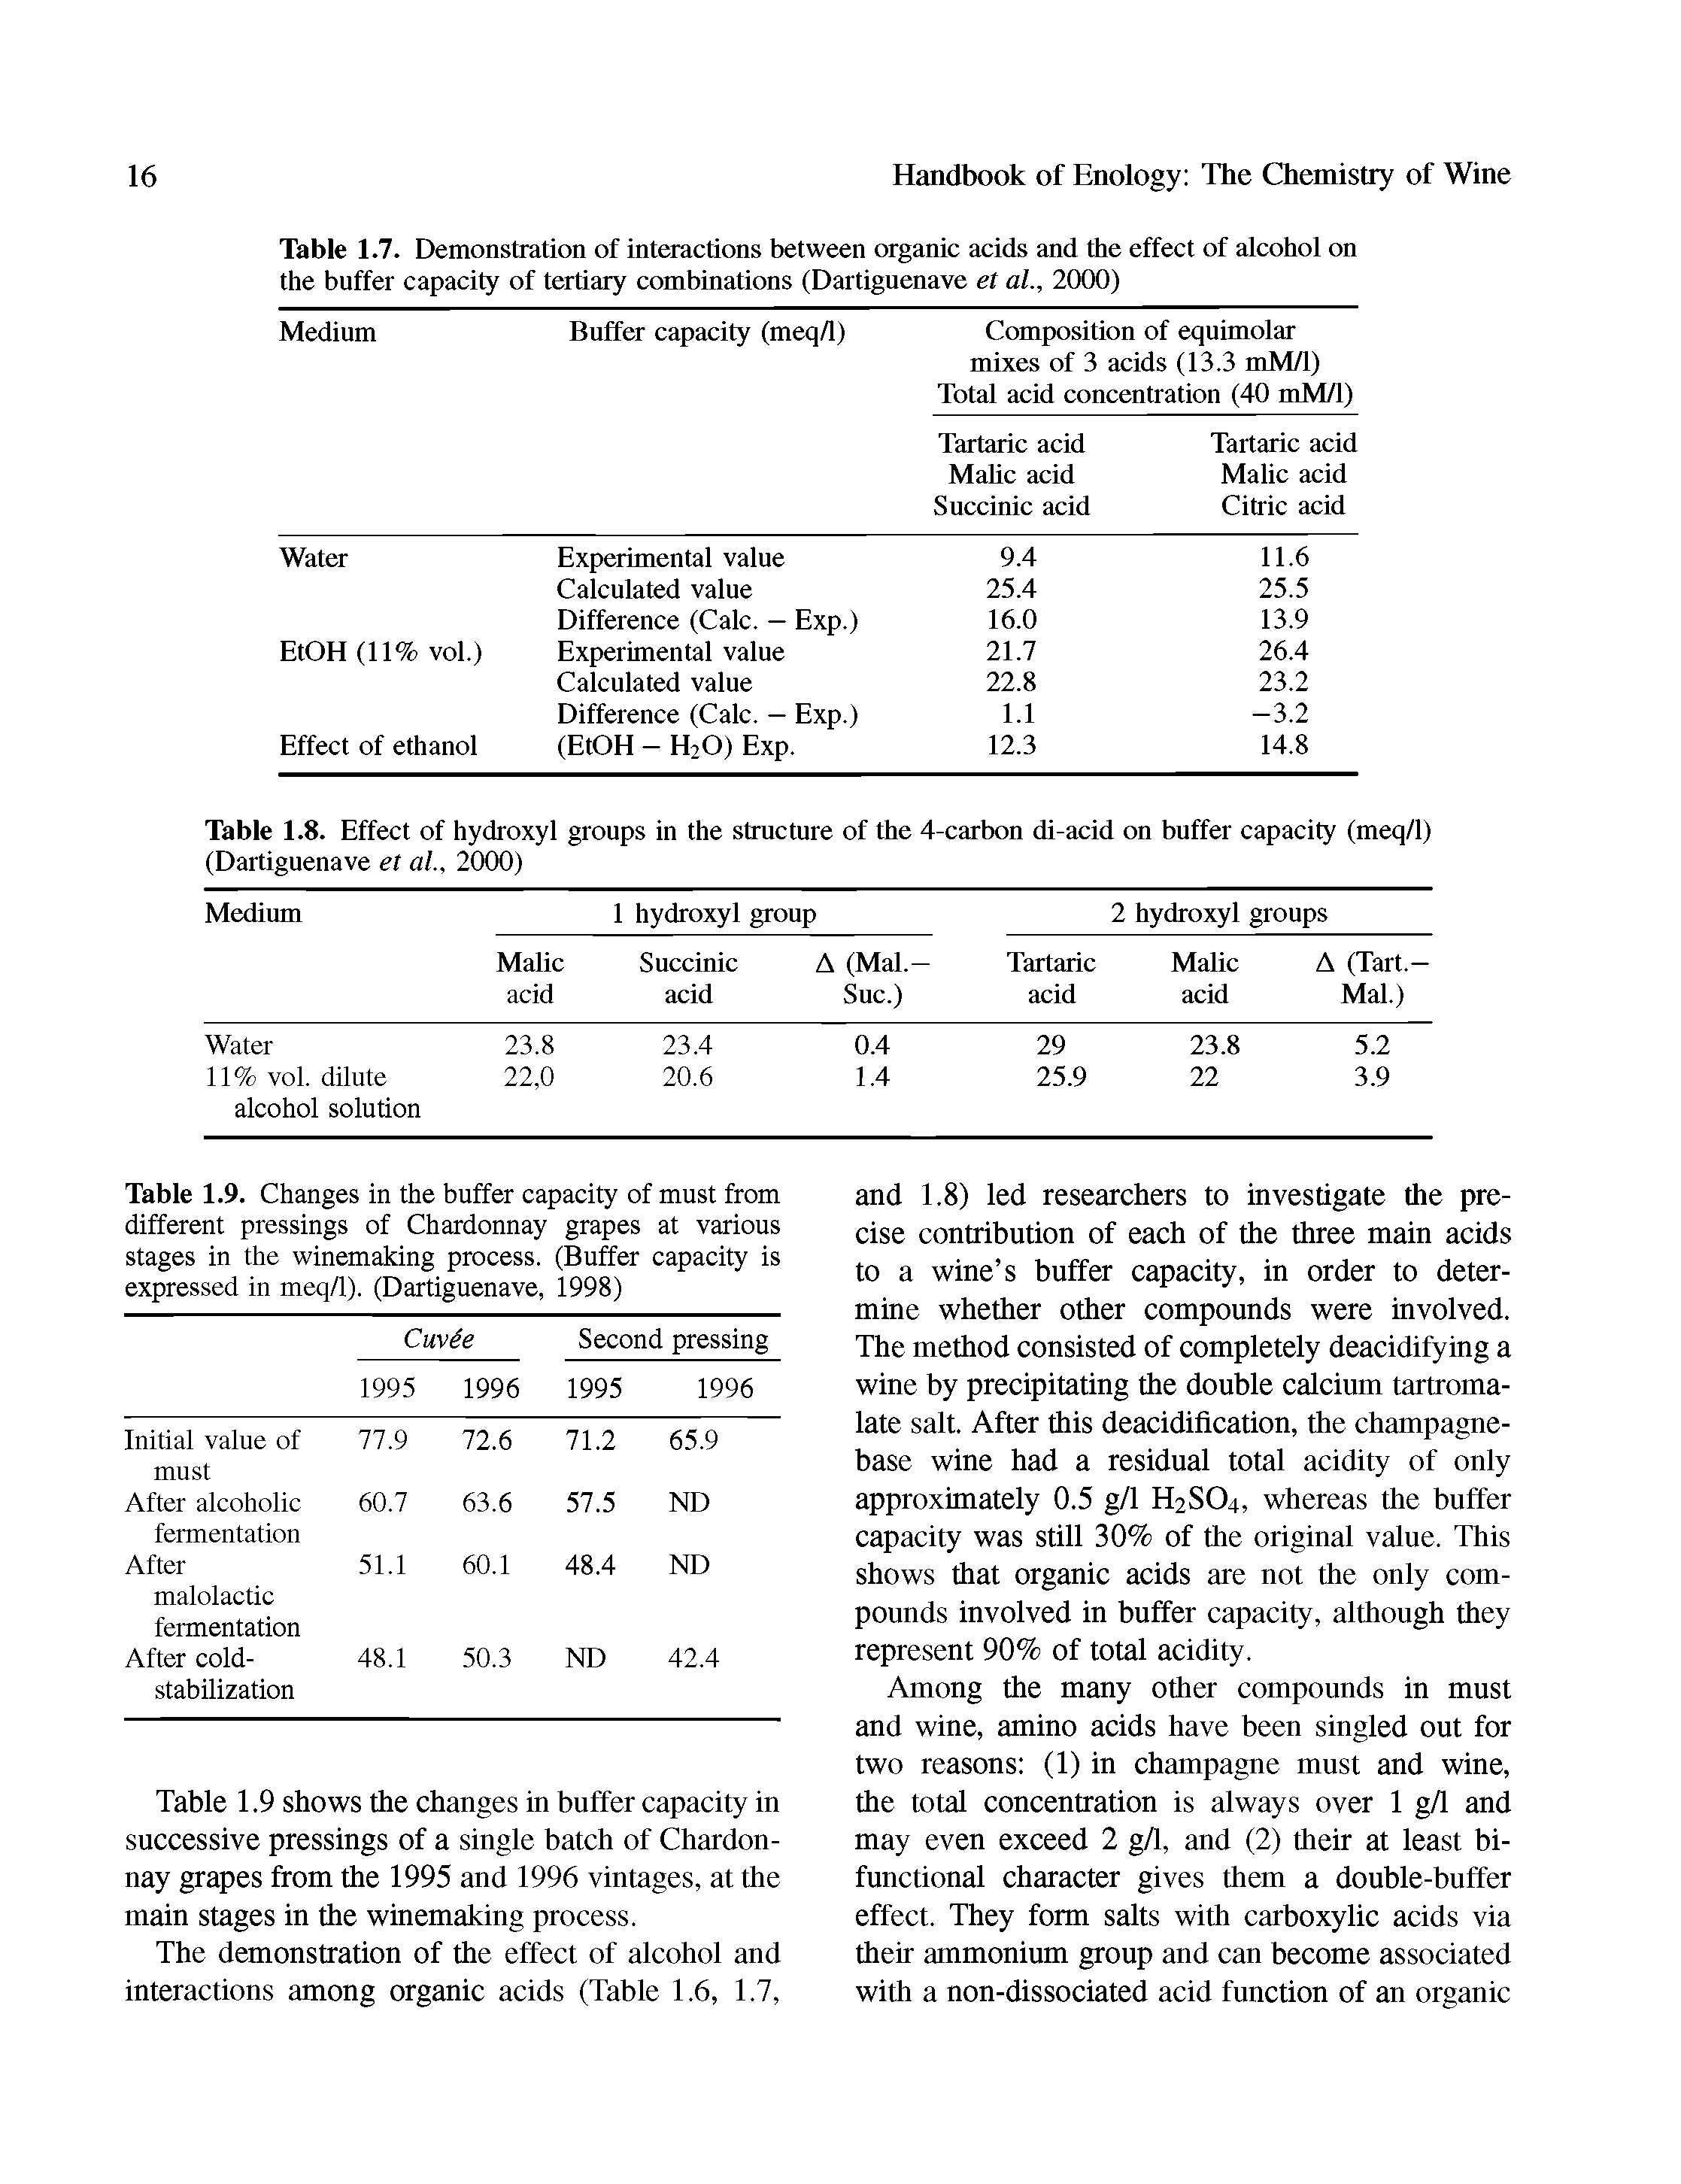 Table 1.9. Changes in the buffer capacity of must from different pressings of Chardonnay grapes at various stages in the winemaking process. (Buffer capacity is expressed in meq/1). (Dartiguenave, 1998)...